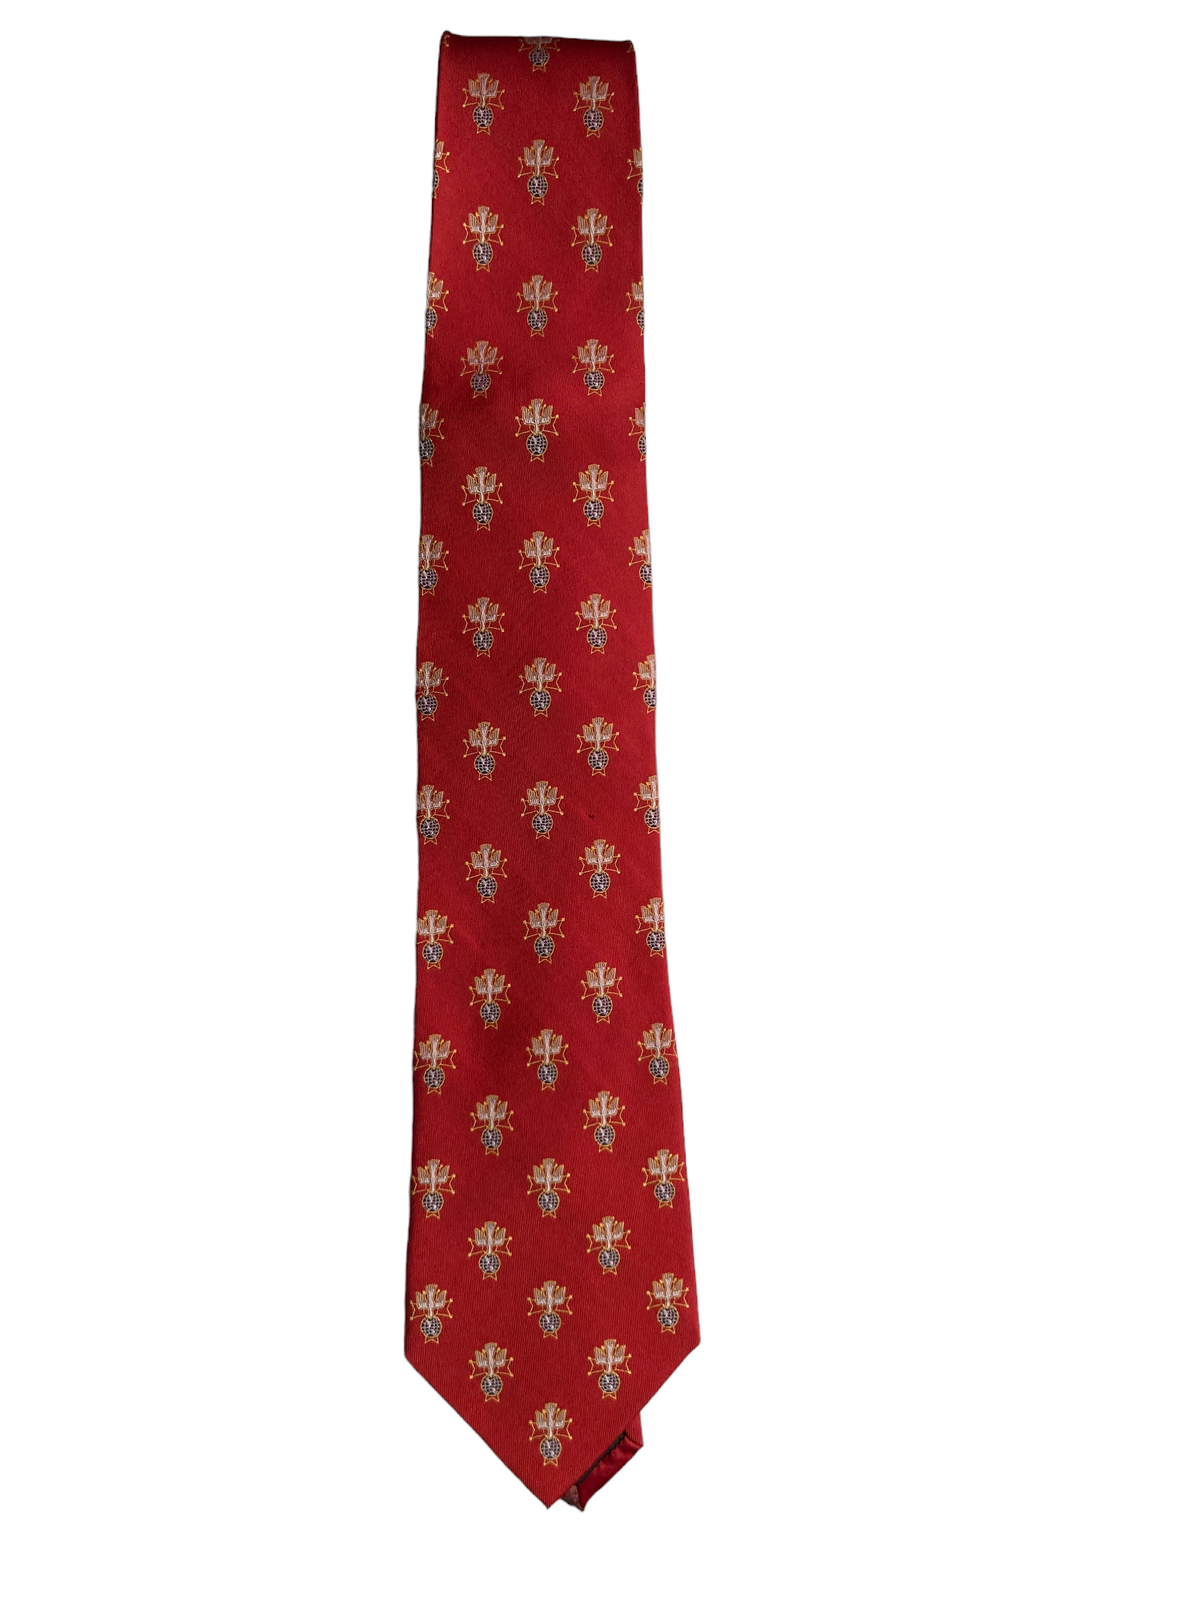 Red Tie with 4th Degree Logo Step-n-Repeat- Regular and Long